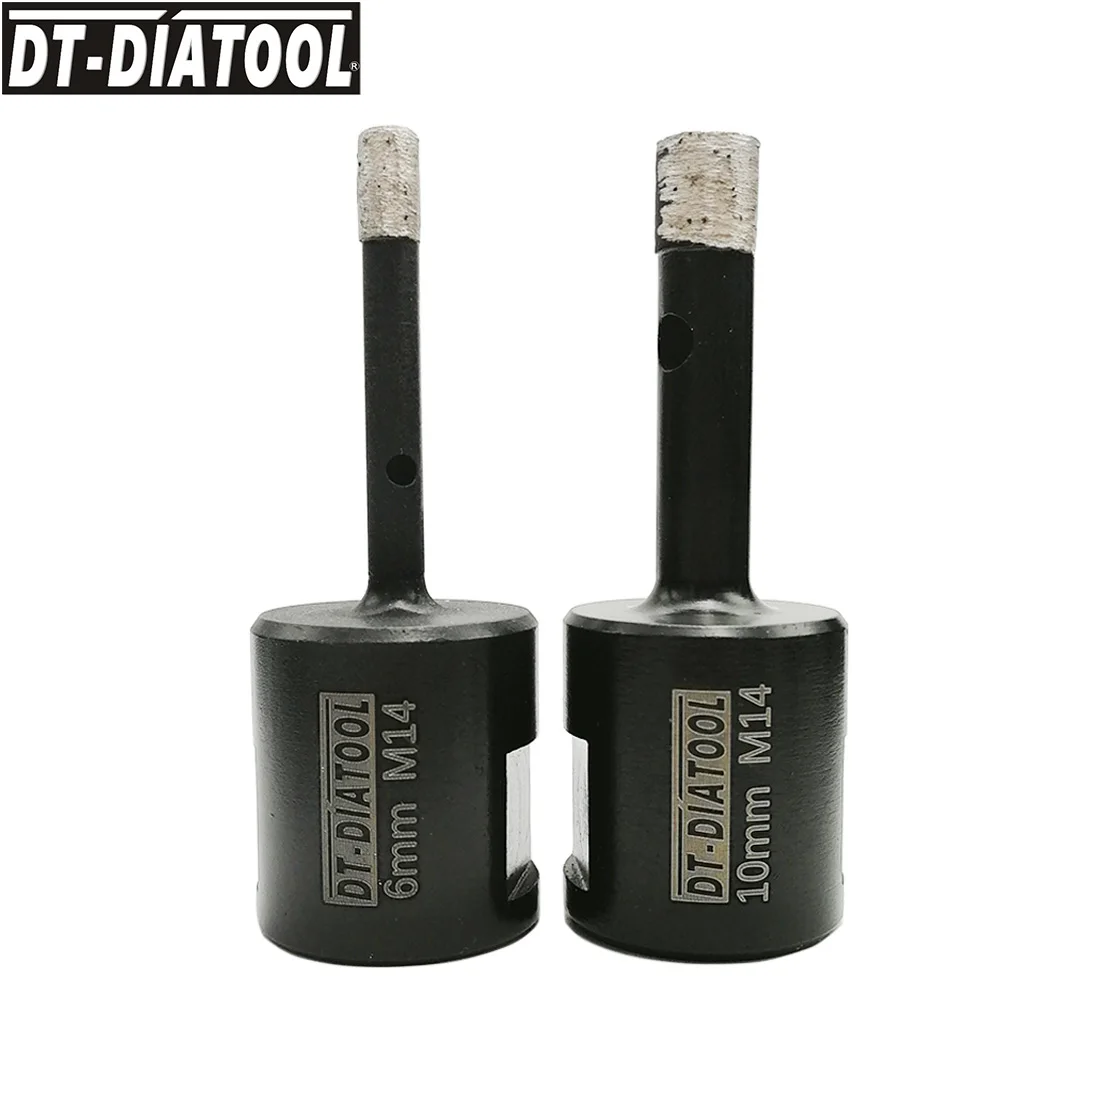 DT-DIATOOL 2pcs/Set 6+10mm M14 Diamond Wet Welded Solid Segments Drilling Core Bits Drill Bits Hole Saw For Granite Stone Marble dt diatool 2pcs 5 8 11 thread dia 8mm welded diamond drilling core bits drill bits for drilling marble granite stone hole saw